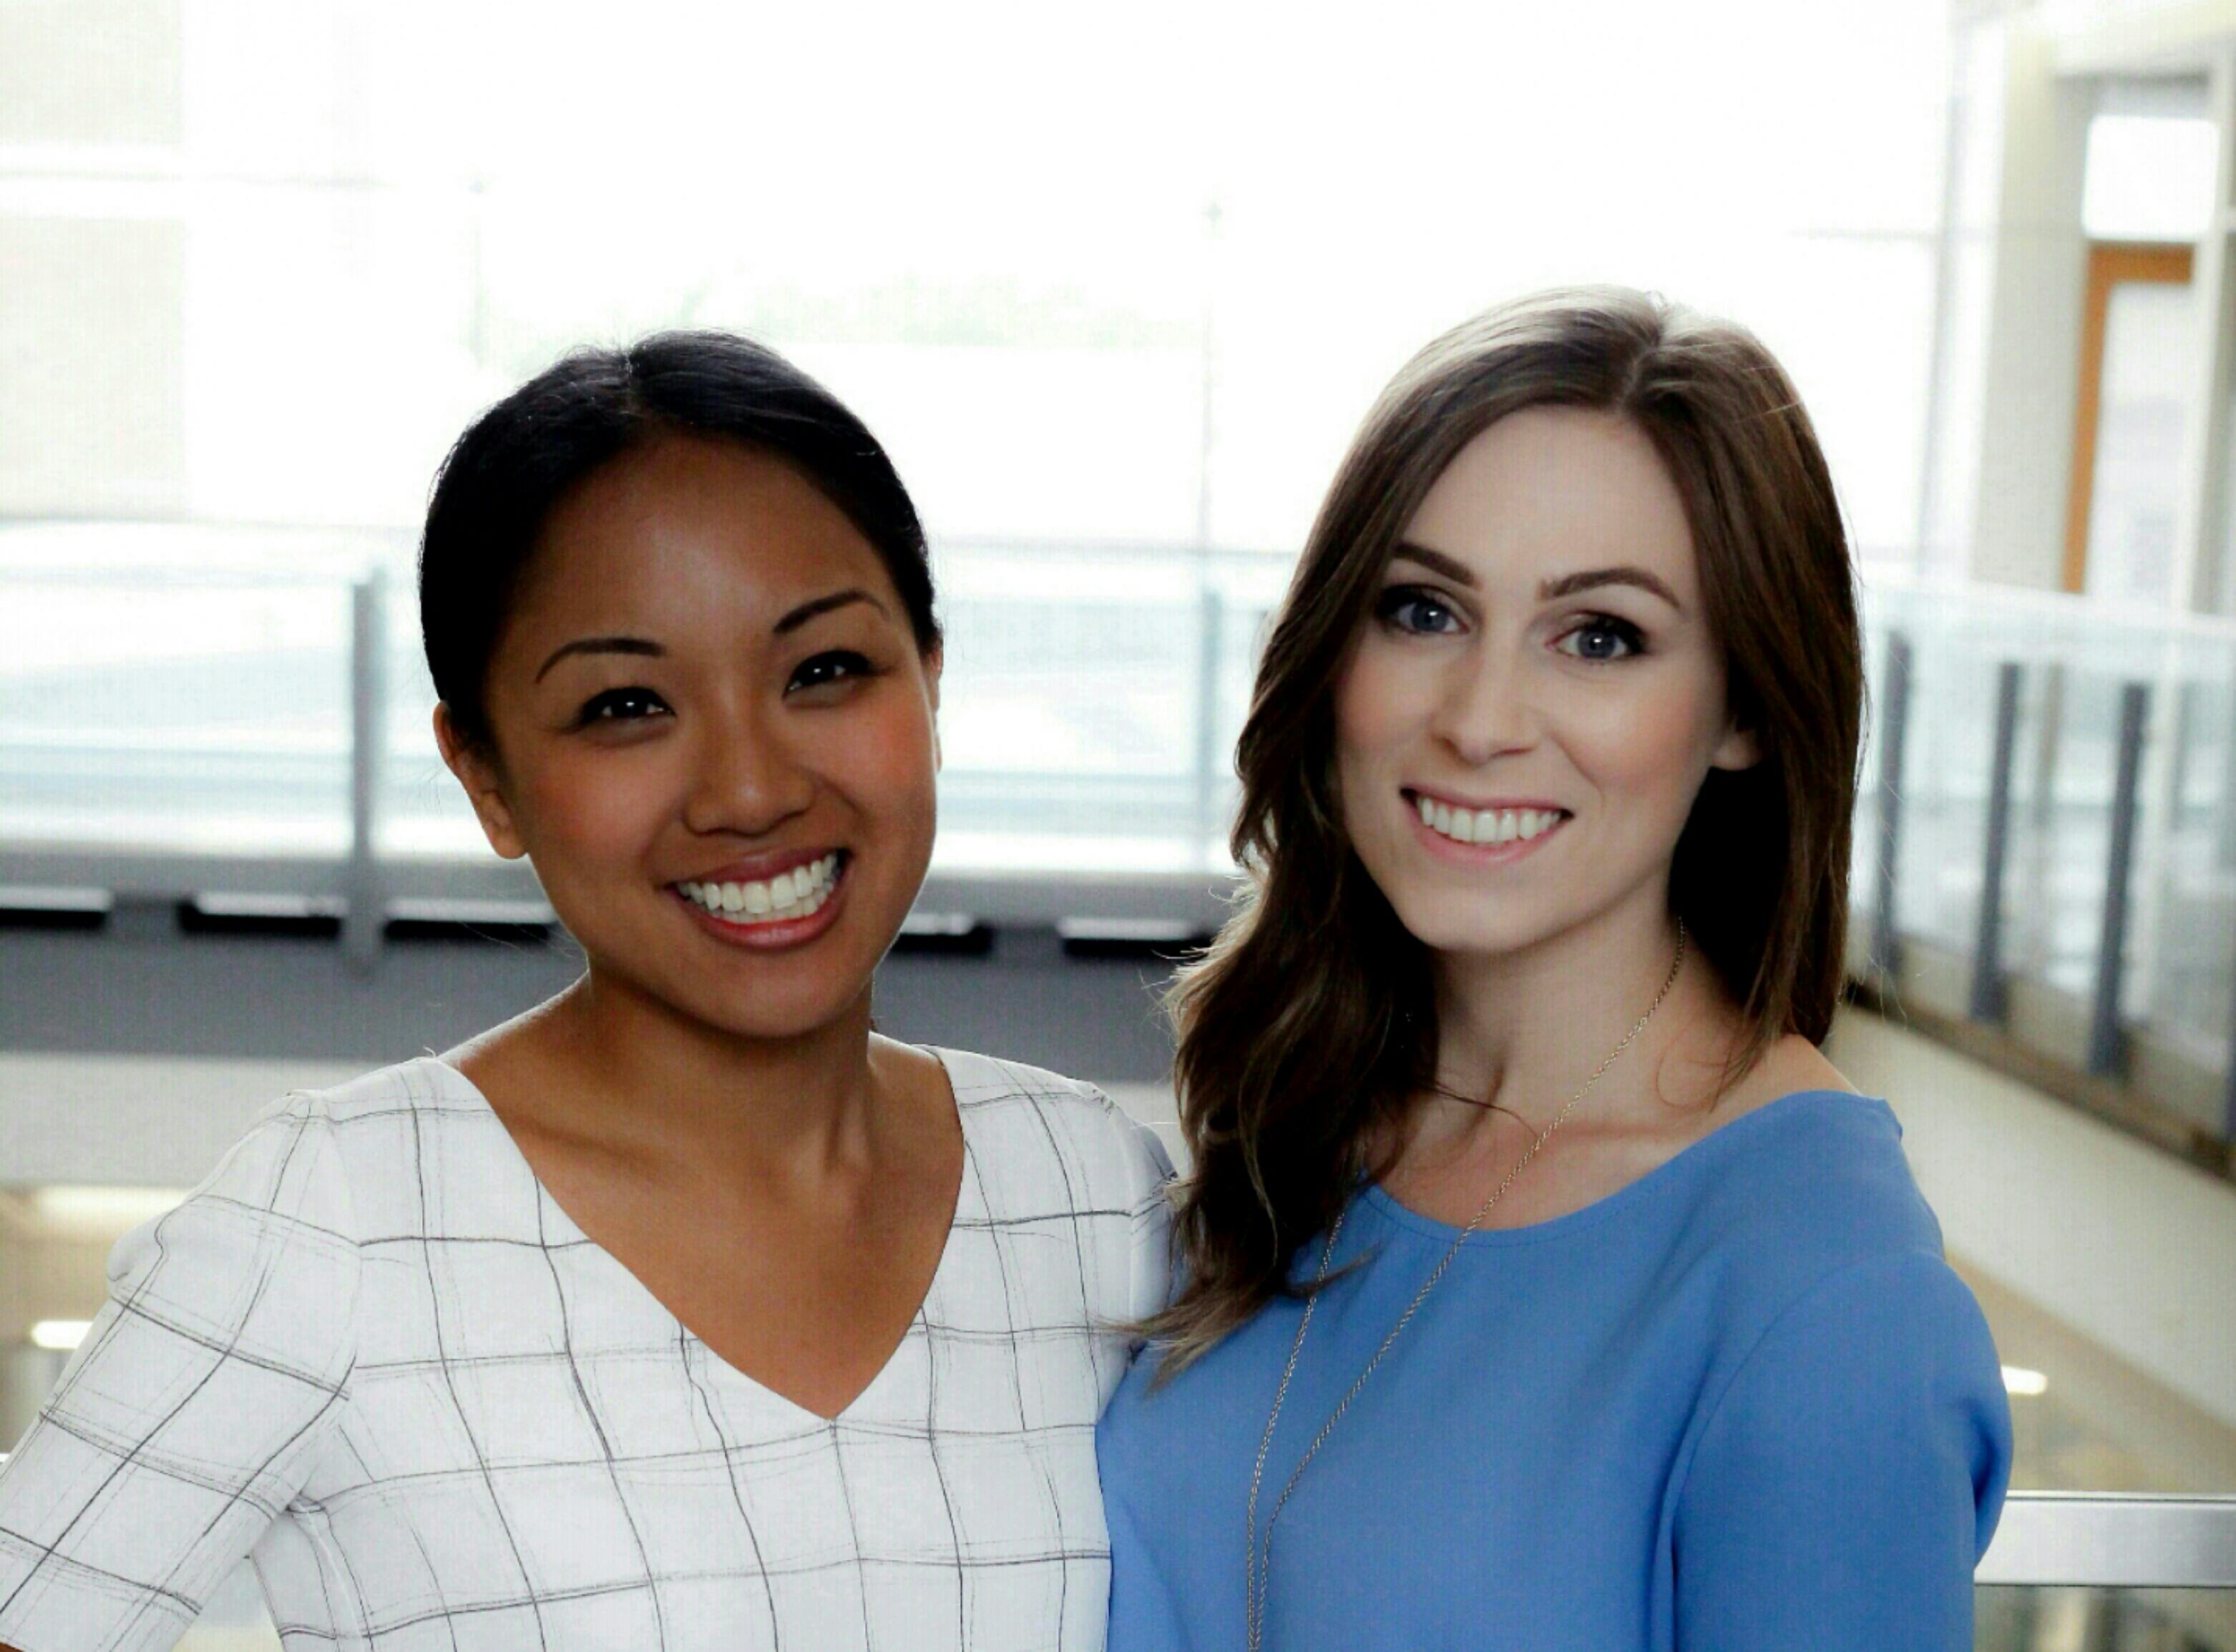 University of Alberta medical students Andrée Vincent and Roxanne Pinson